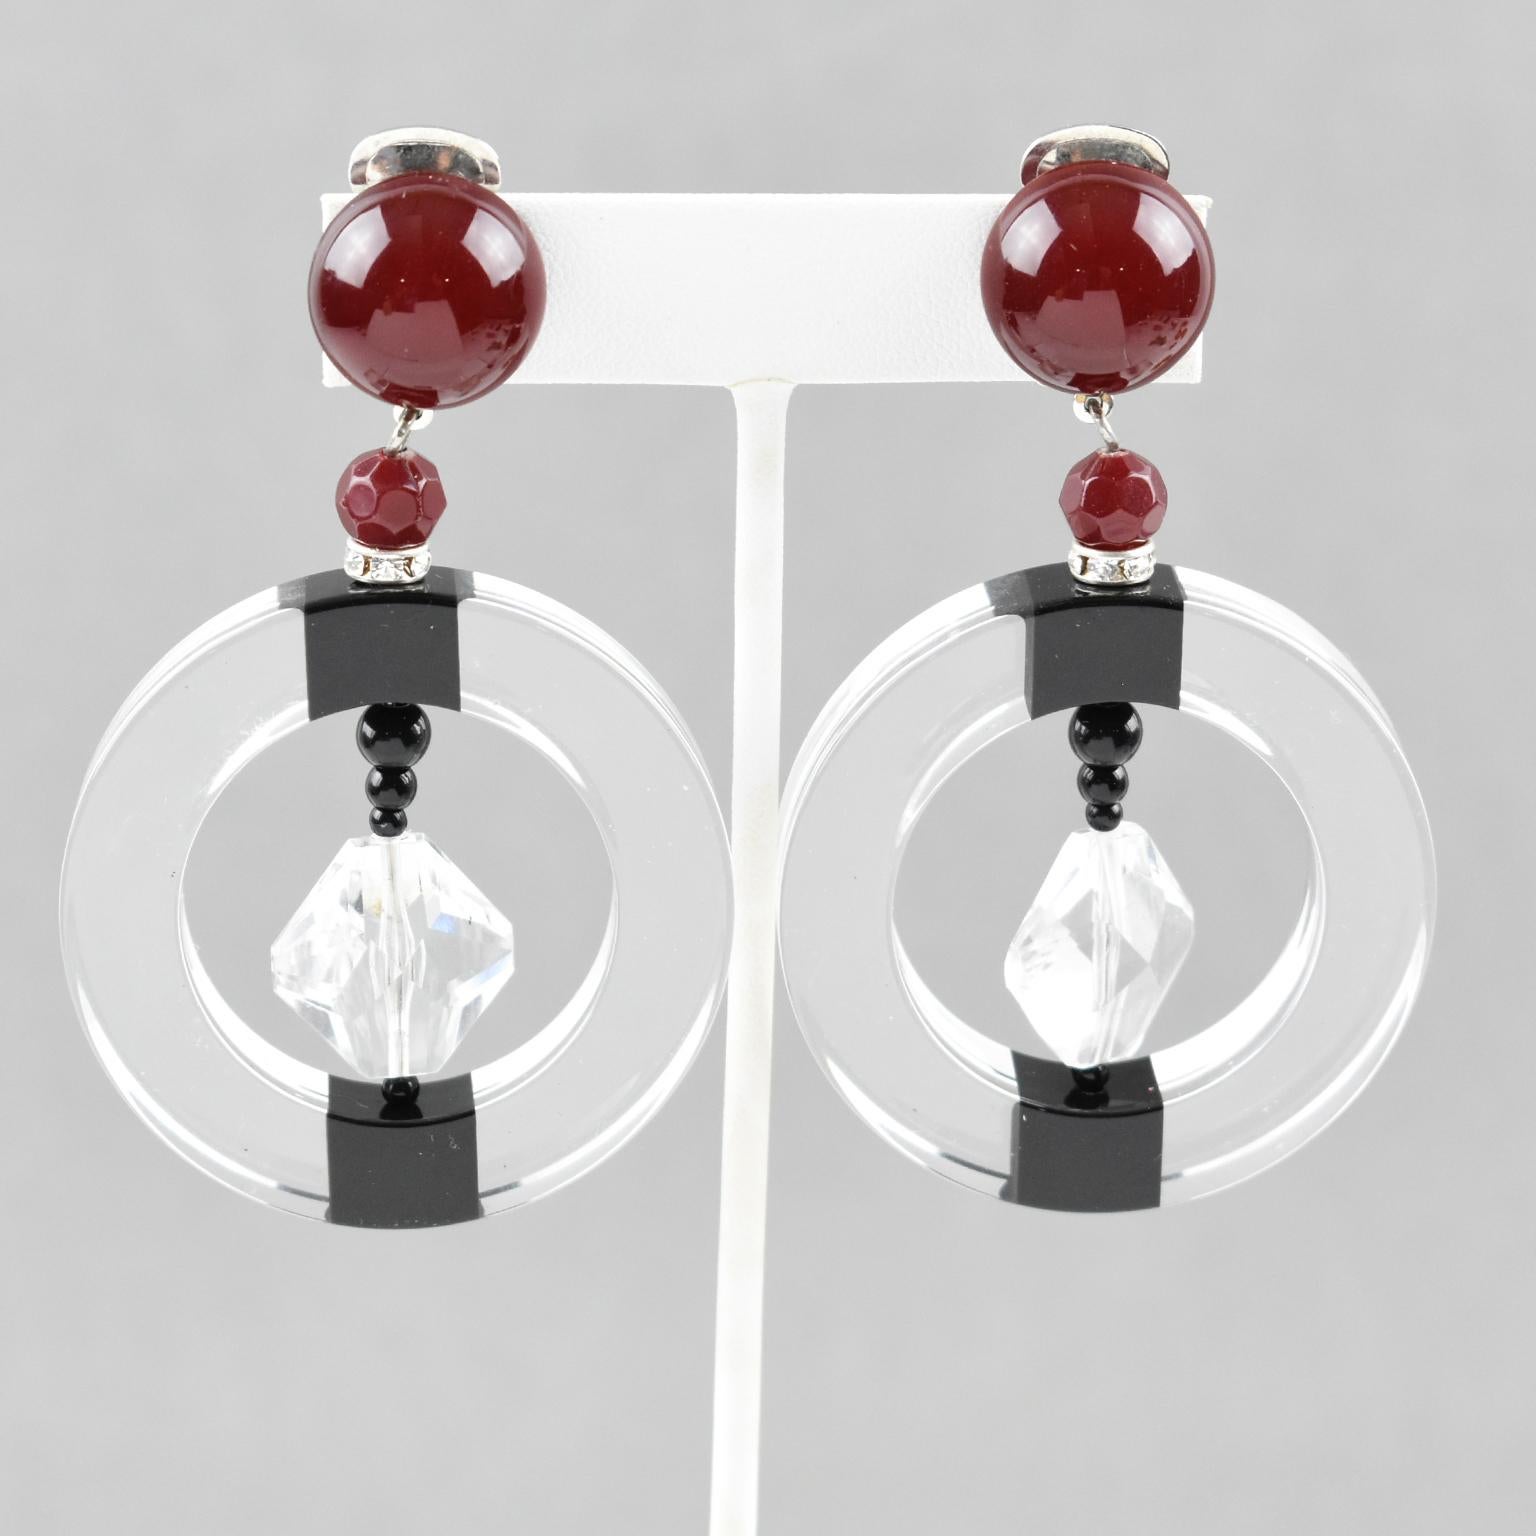 Stunning Angela Caputi, made in Italy resin clip on earrings. Oversized dangling design with large crystal clear hoop ornate with black and burgundy red elements and topped with clear rhinestones spacer ring. Her matching of colors is always